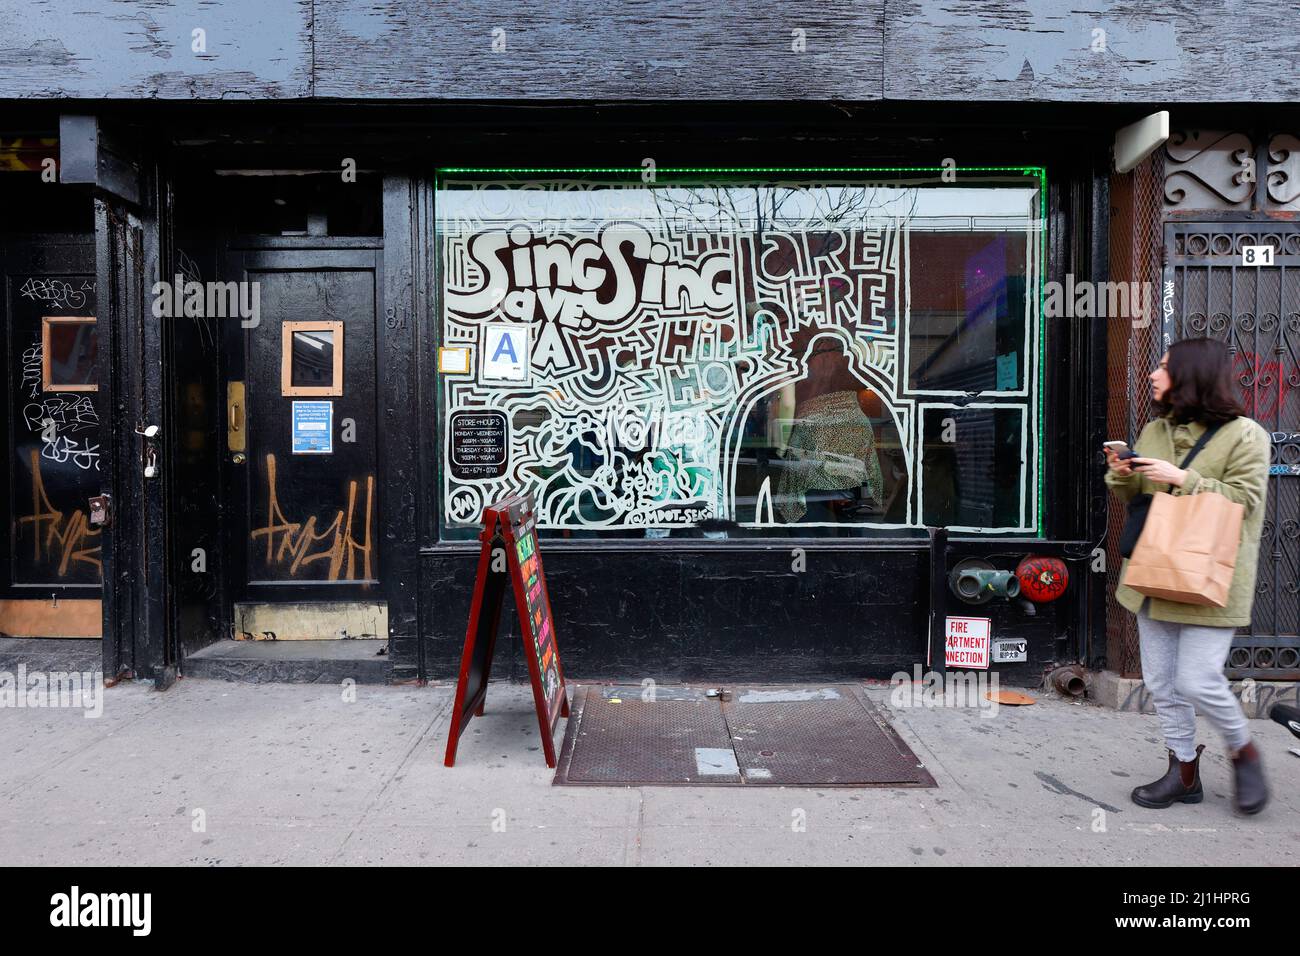 Sing Sing, 81 Avenue A, New York, NYC storefront photo of a karaoke bar in Manhattan's East Village. Stock Photo